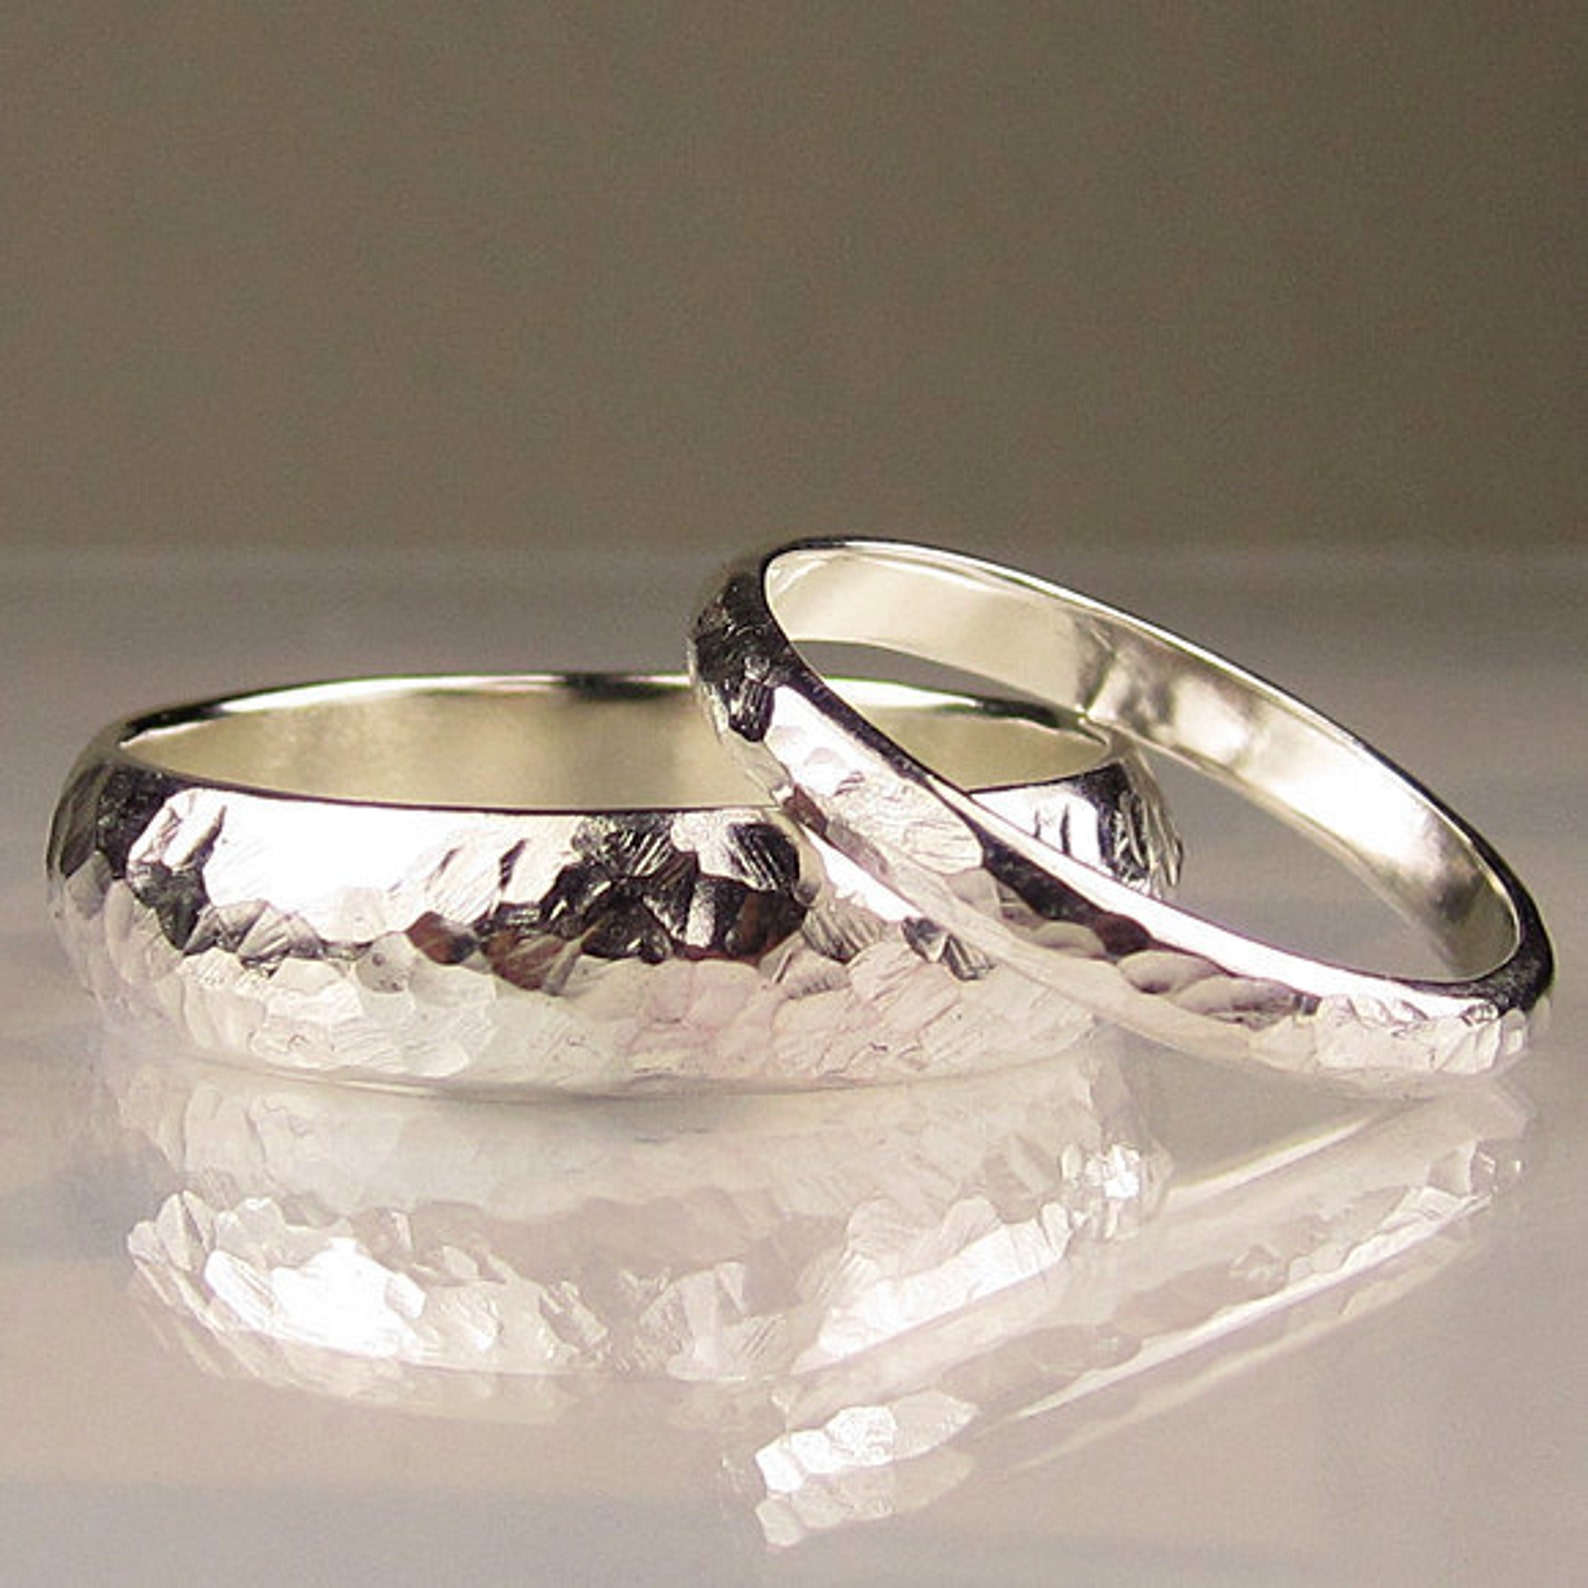 Recycled Sterling Silver Wedding Band Set - Etsy